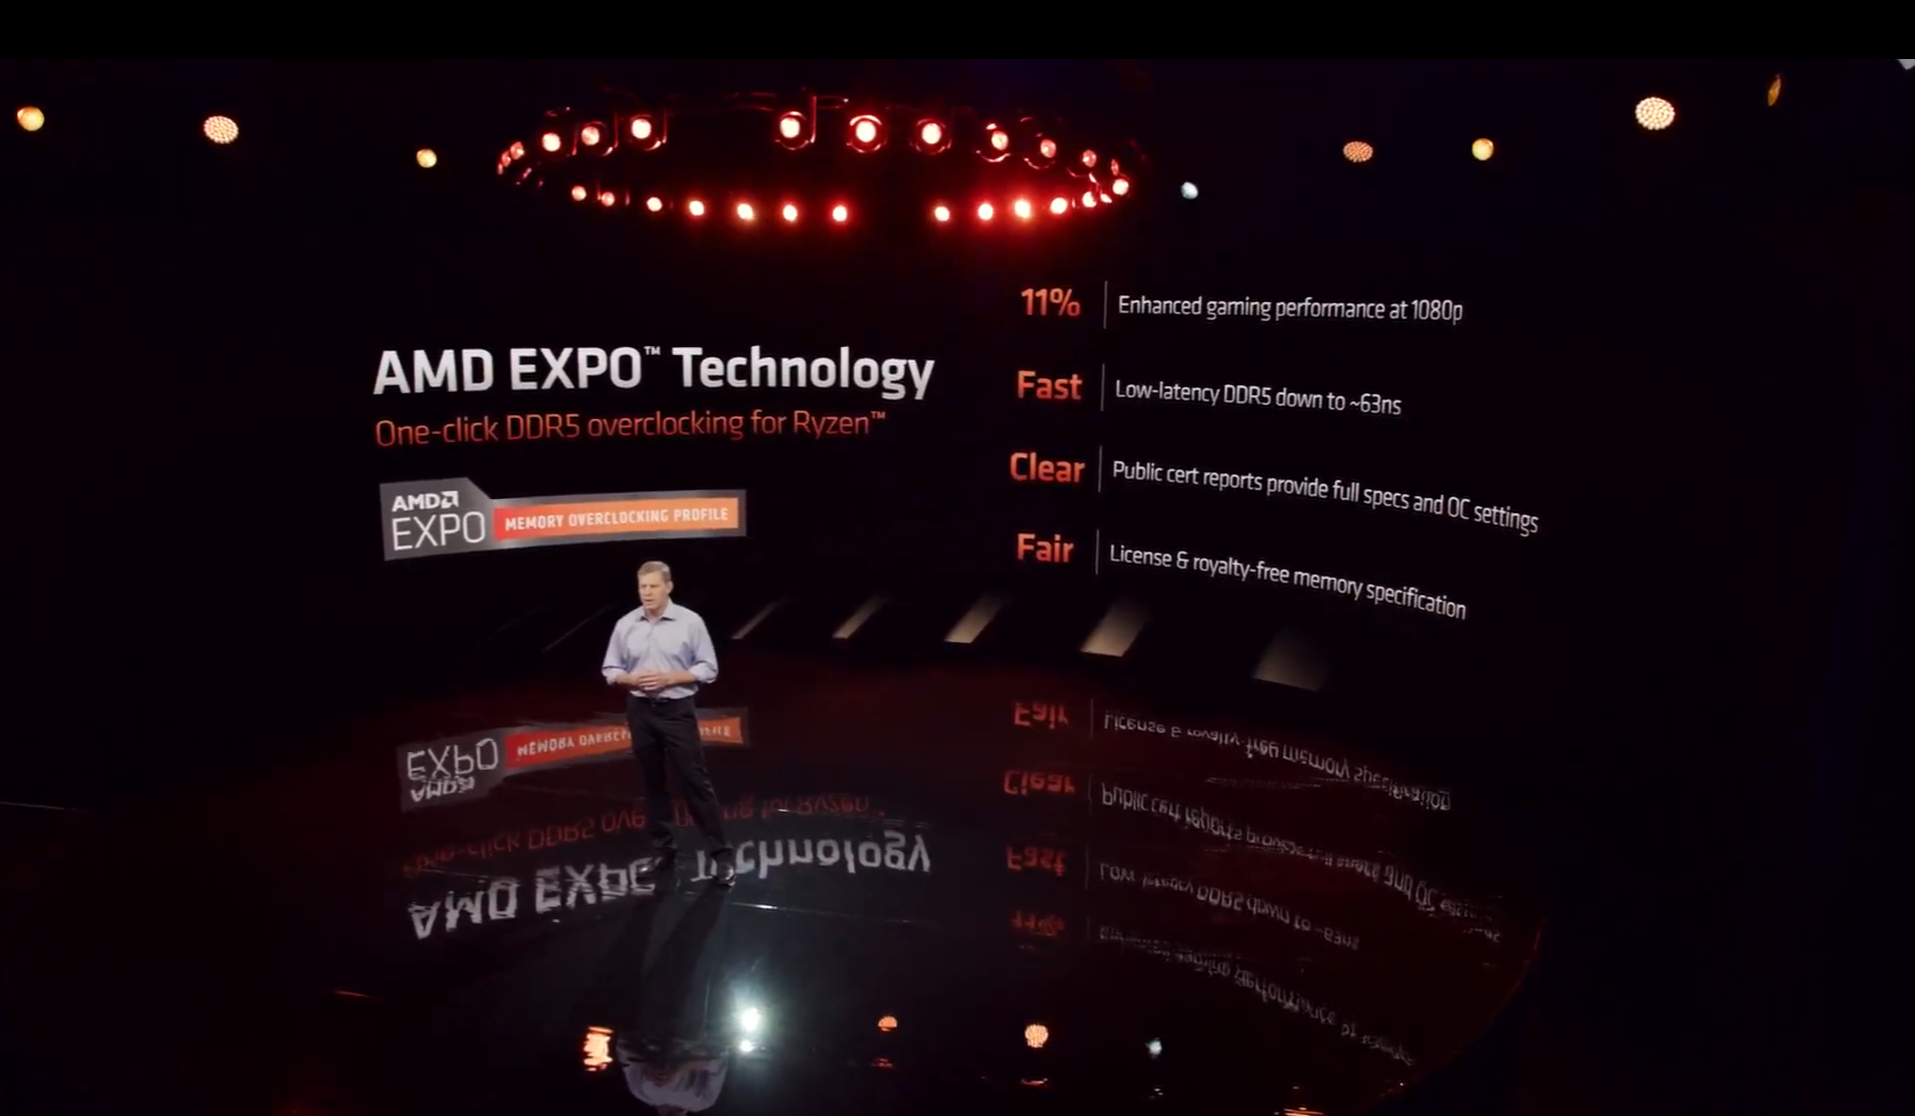 David McAfee talks about AMD Expo